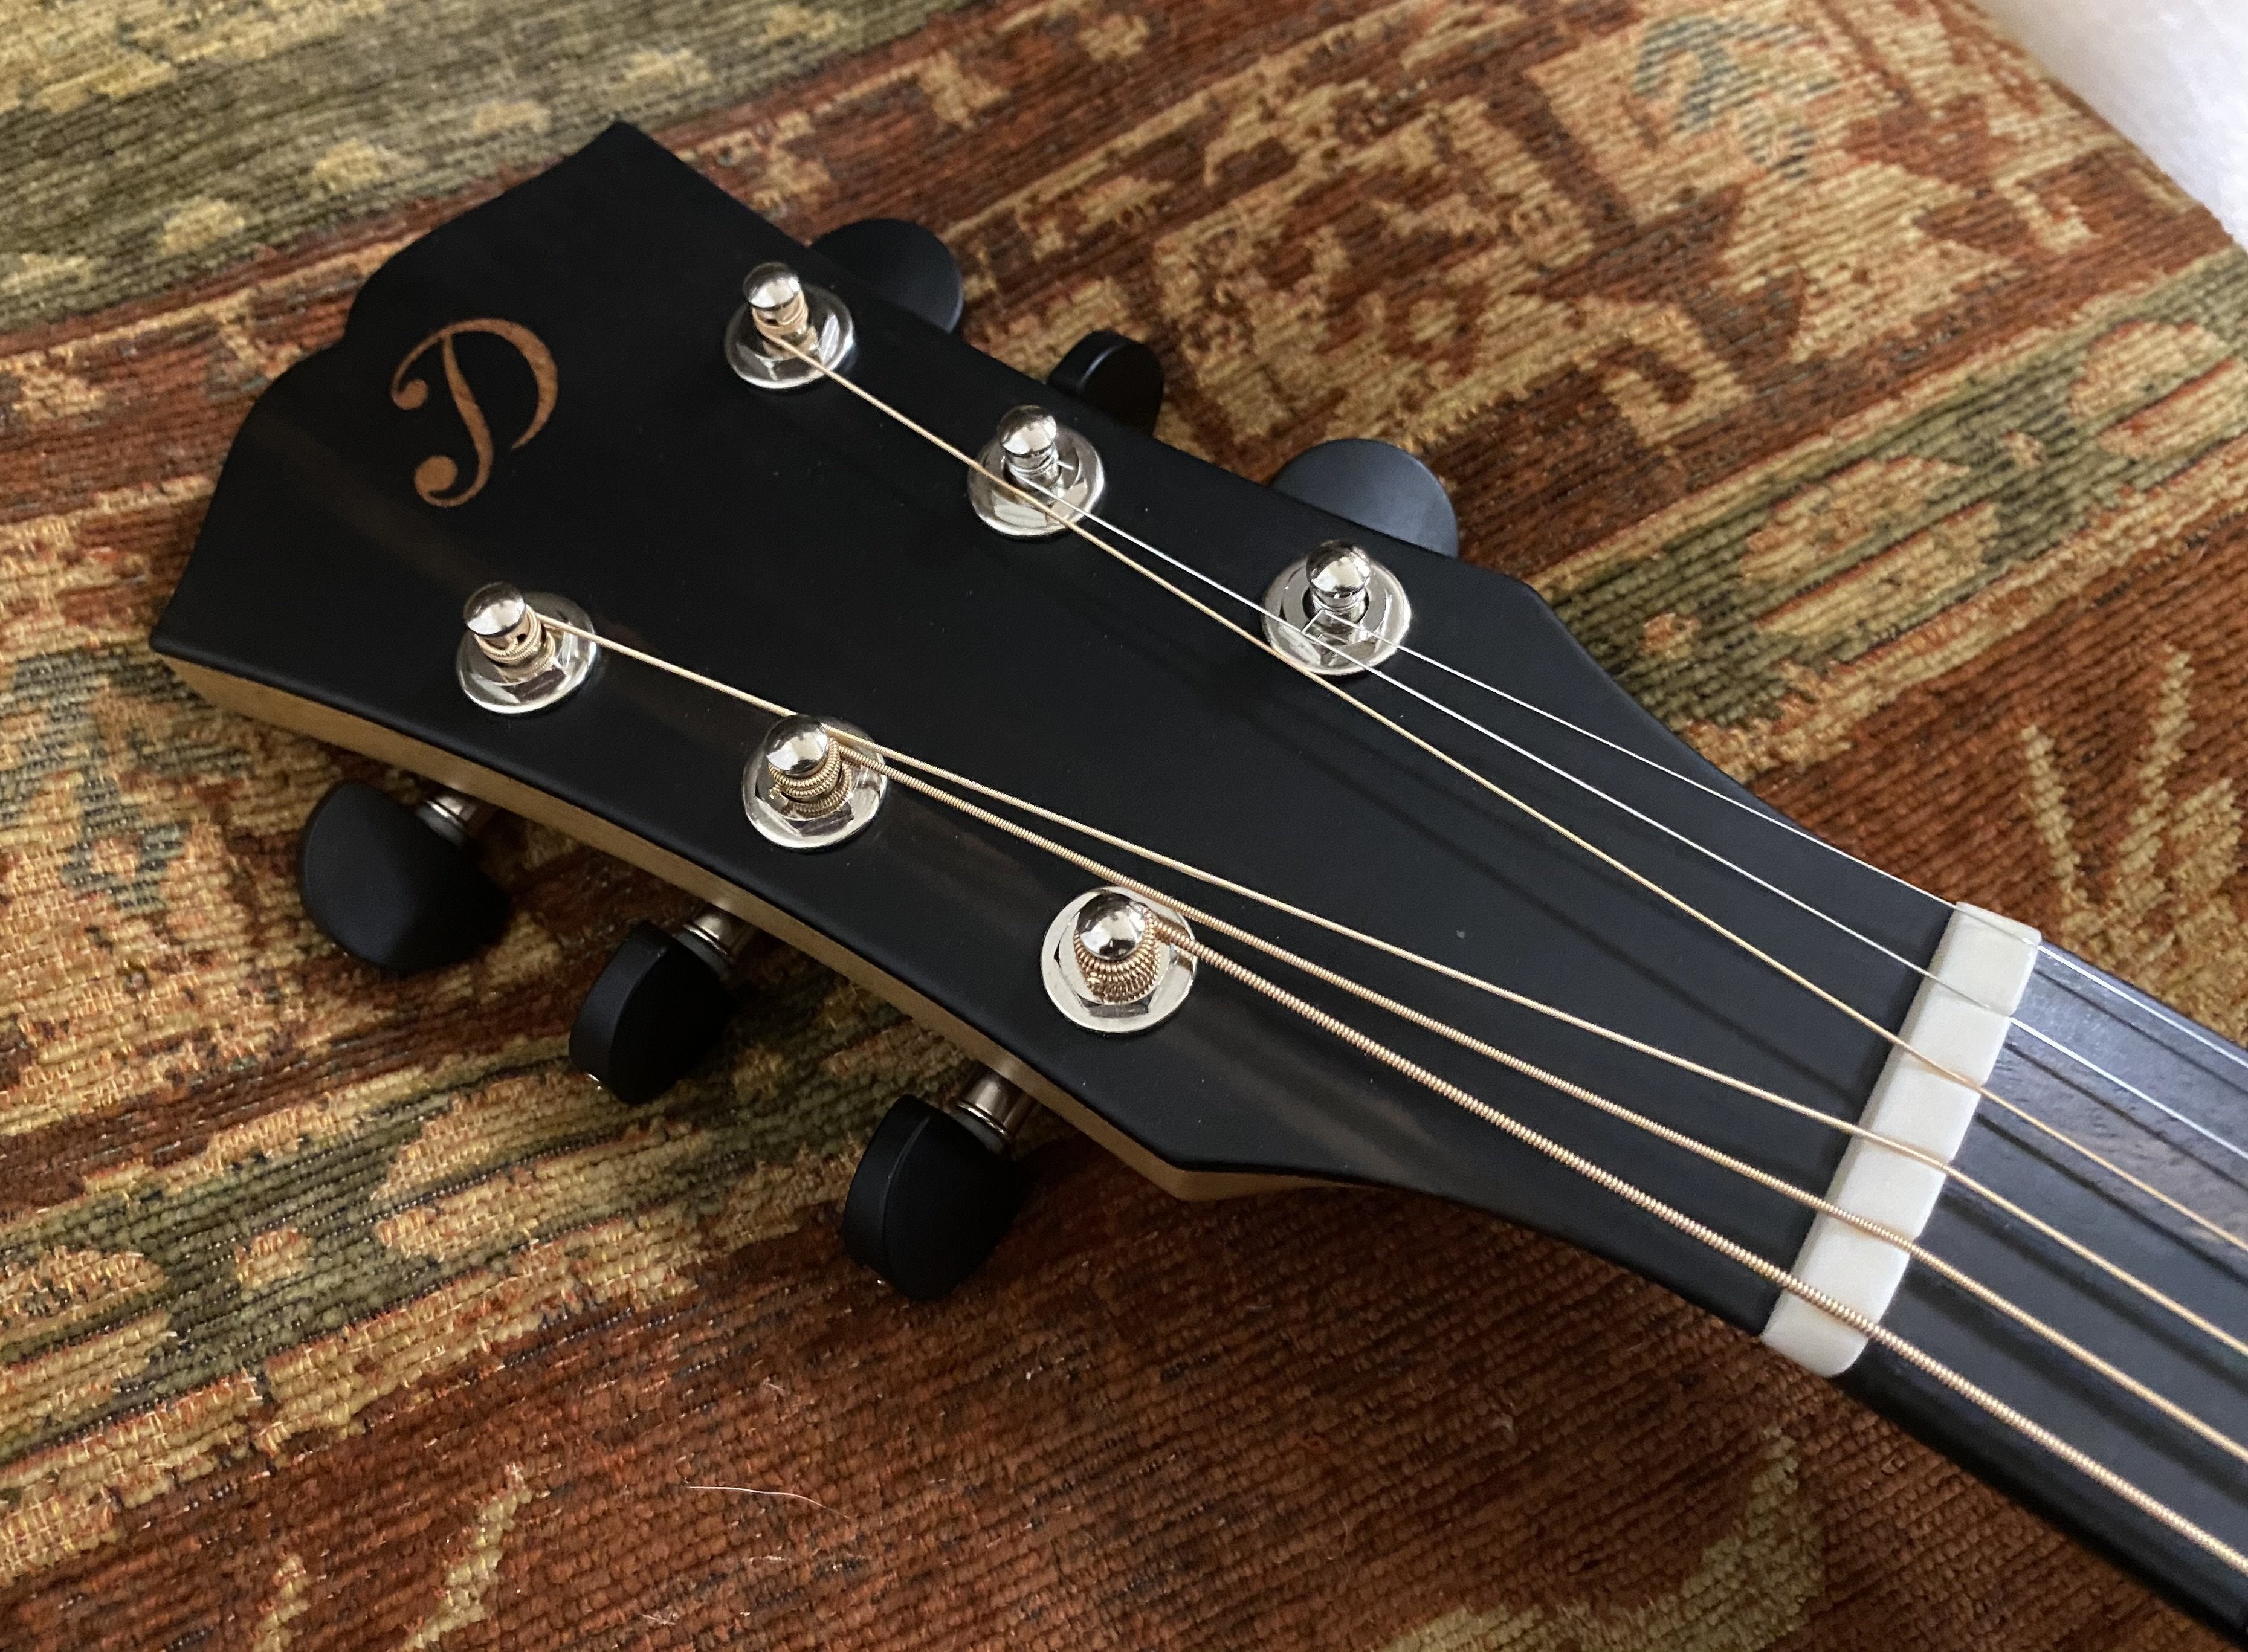 Dowina Pure GAC - The Worlds Finest Value Hand Made Acoustic Guitar?, Acoustic Guitar for sale at Richards Guitars.